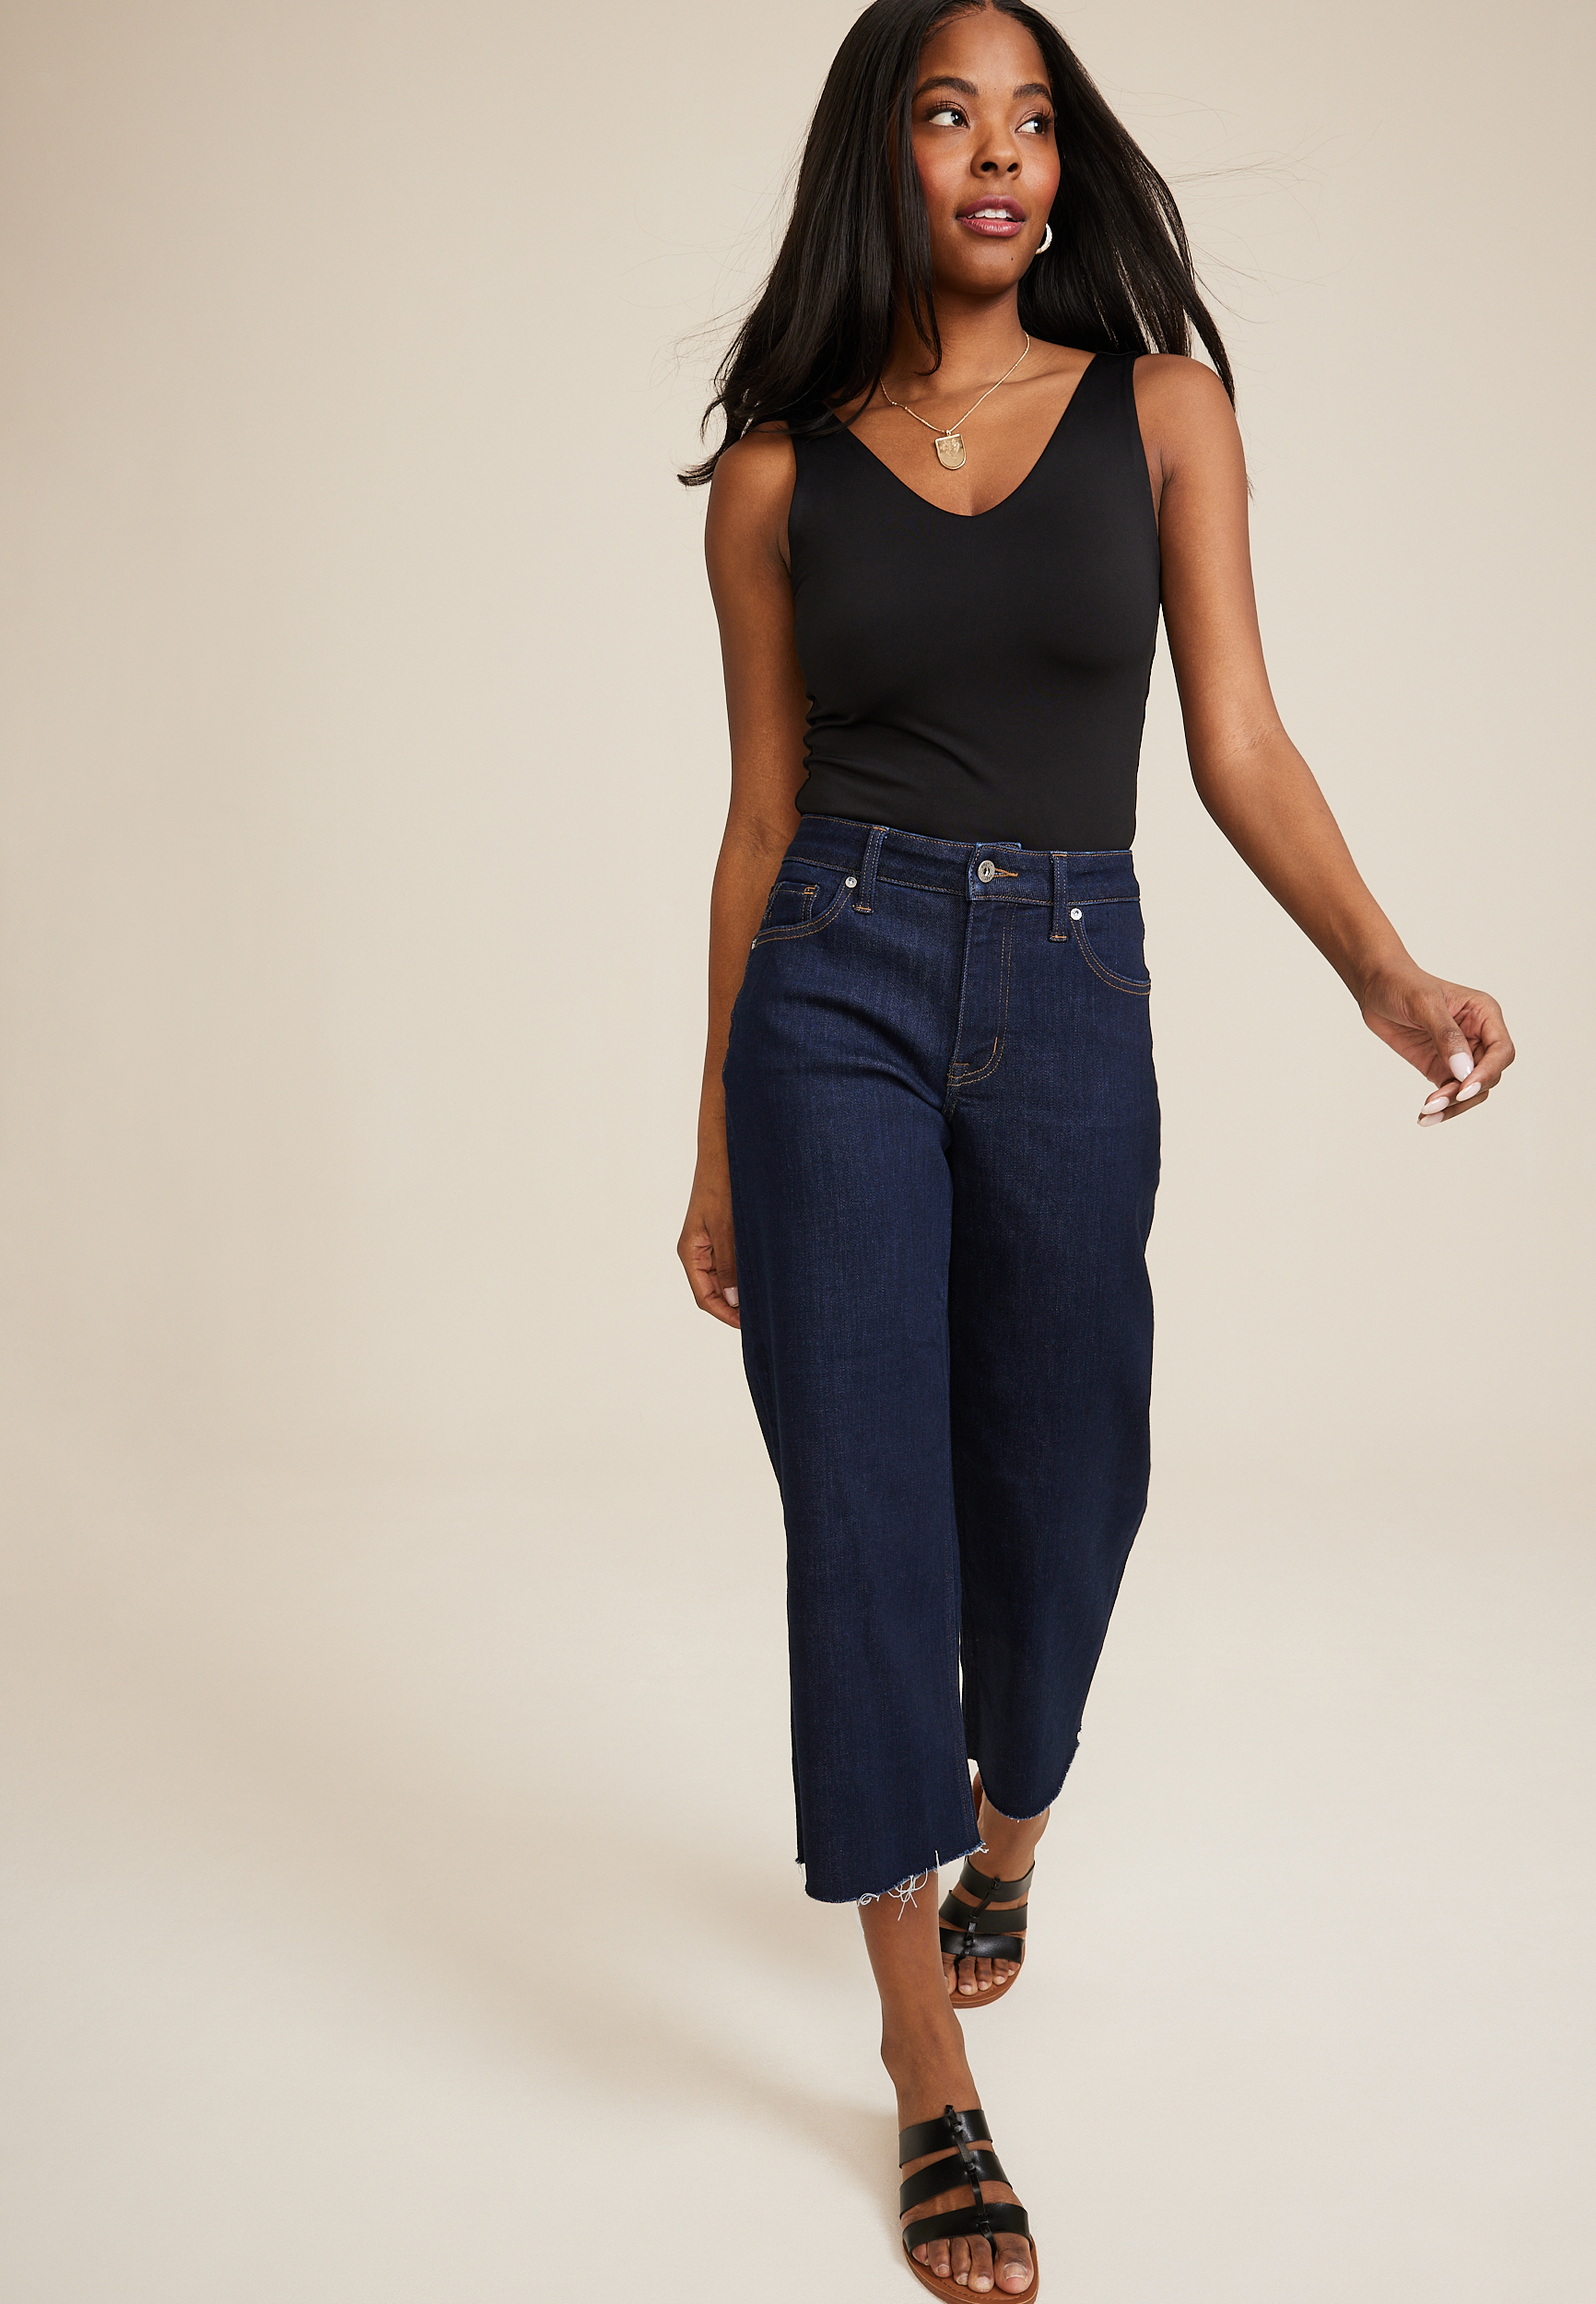 High Rise Jeans For Women